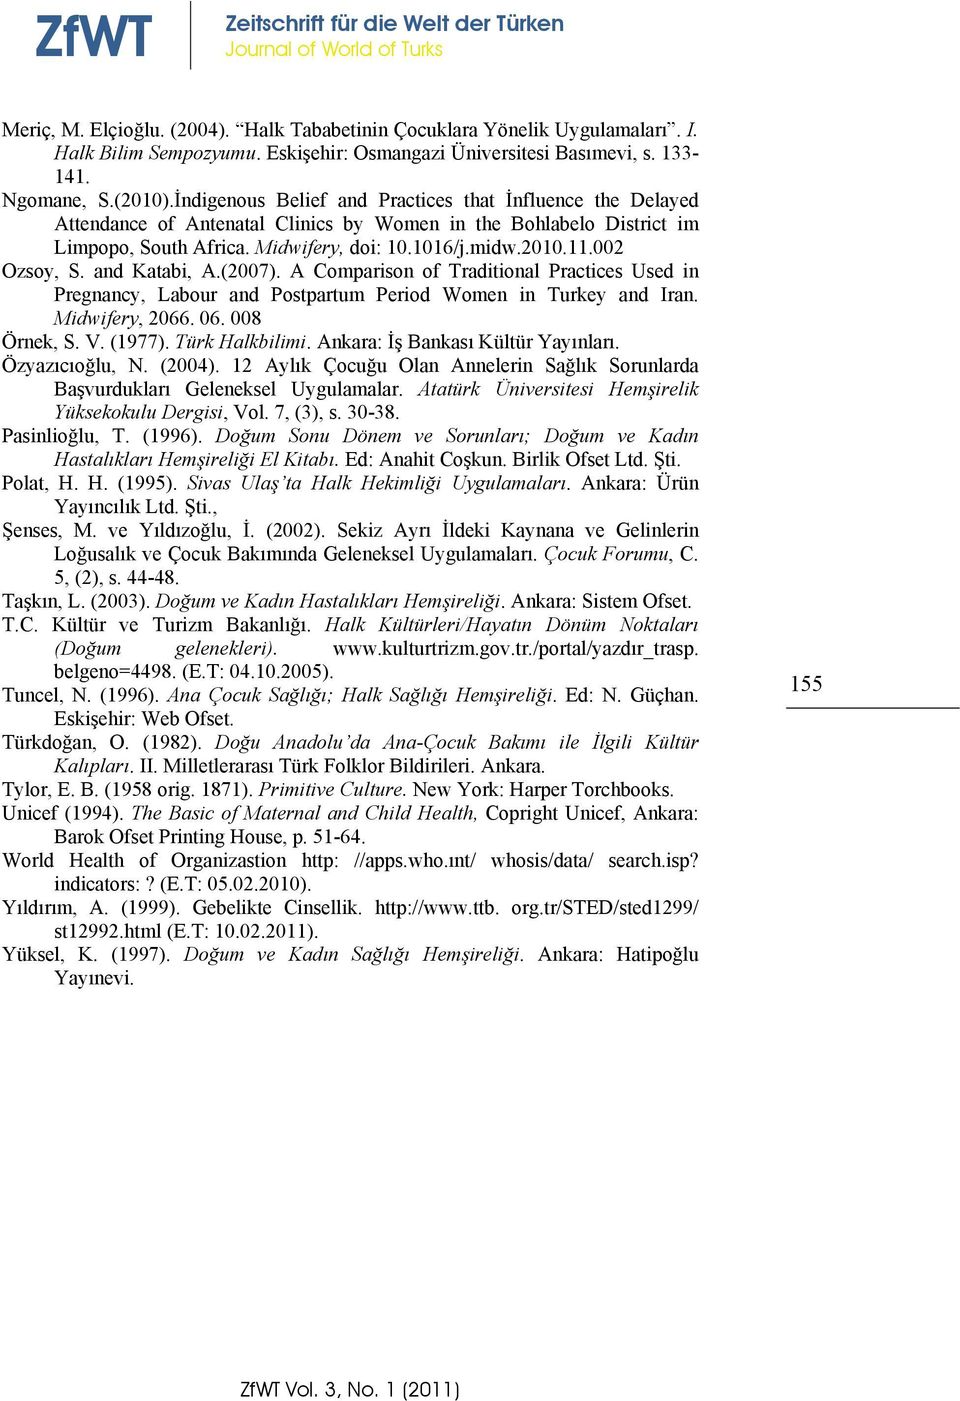 002 Ozsoy, S. and Katabi, A.(2007). A Comparison of Traditional Practices Used in Pregnancy, Labour and Postpartum Period Women in Turkey and Iran. Midwifery, 2066. 06. 008 Örnek, S. V. (1977).